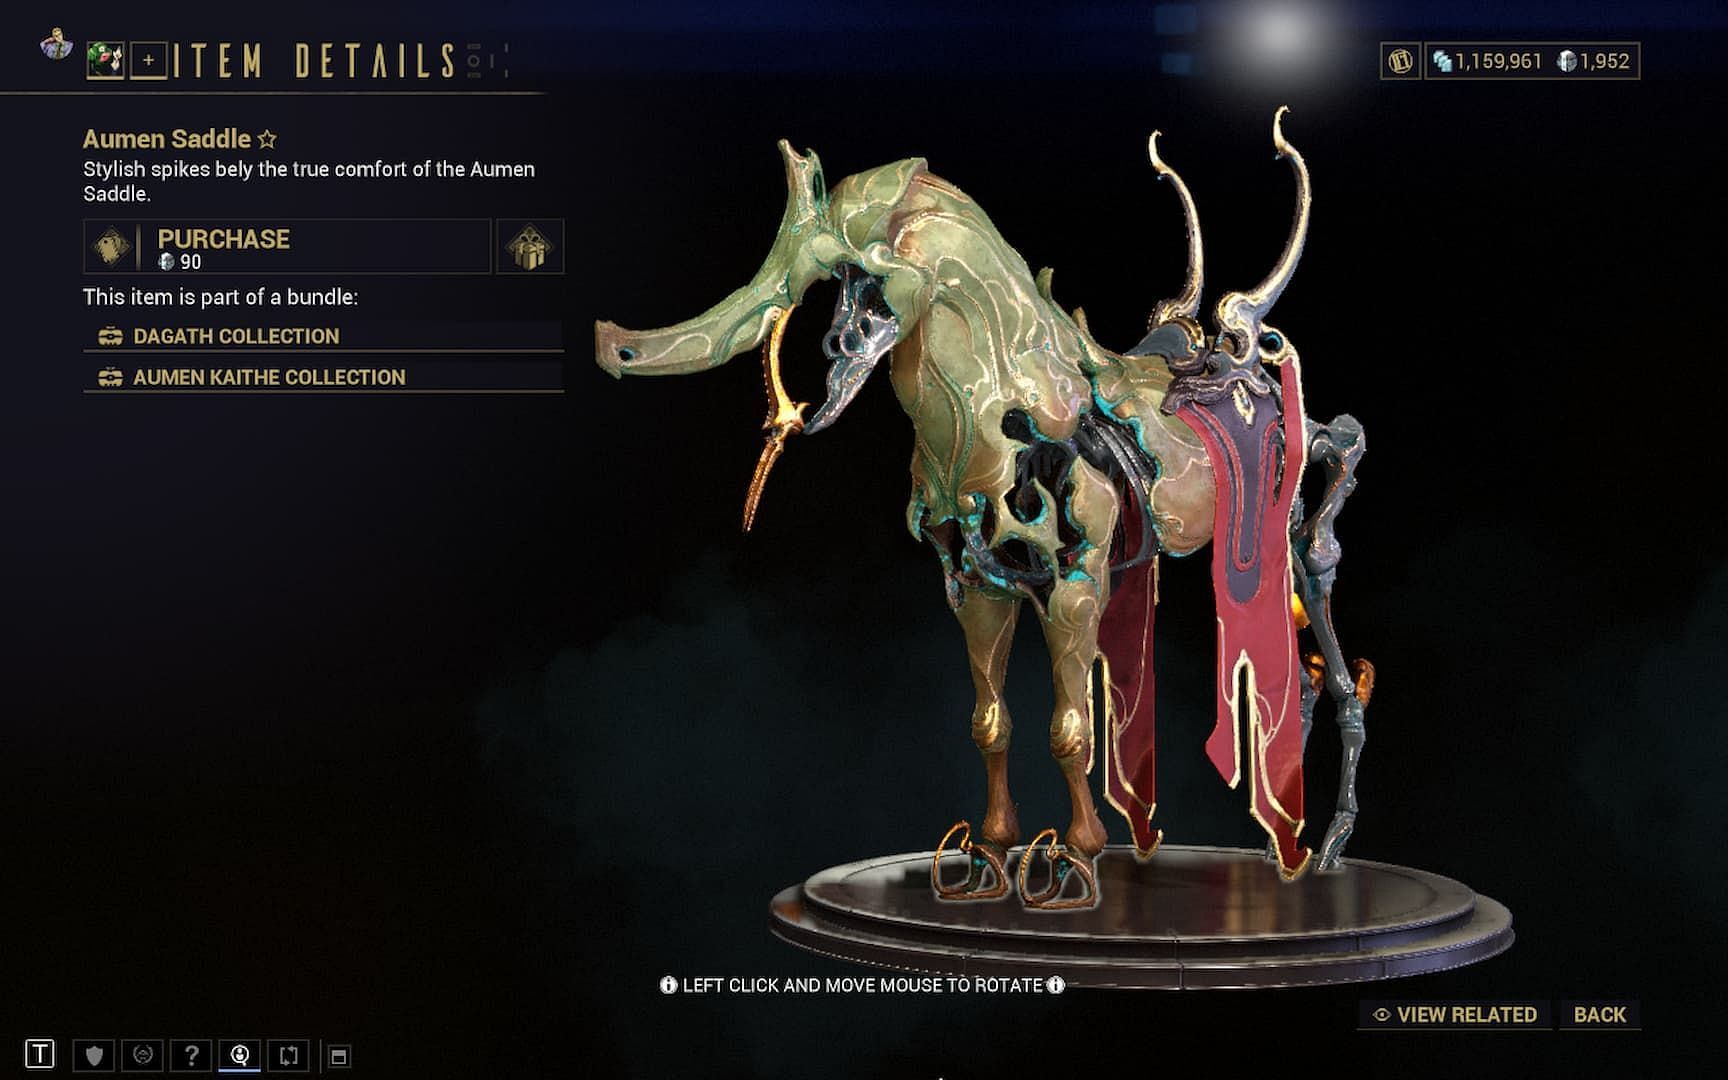 Aumen Kaithe parts can be individually purchased from the Market (Image via Digital Extremes)